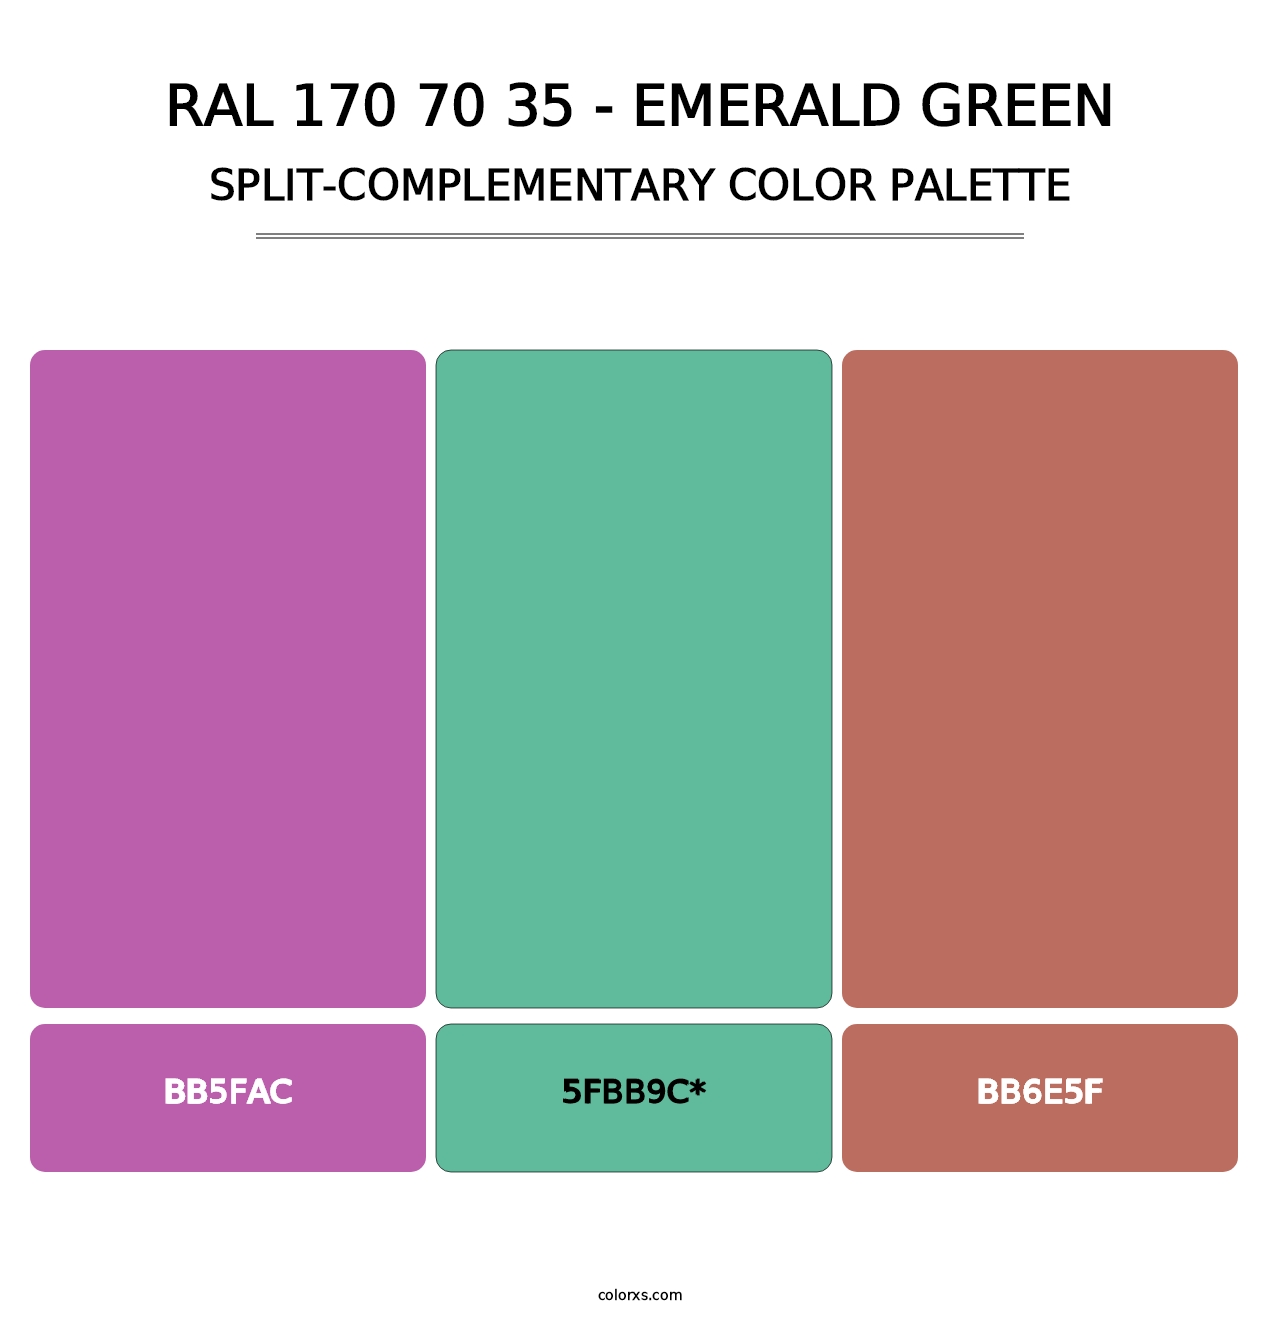 RAL 170 70 35 - Emerald Green - Split-Complementary Color Palette